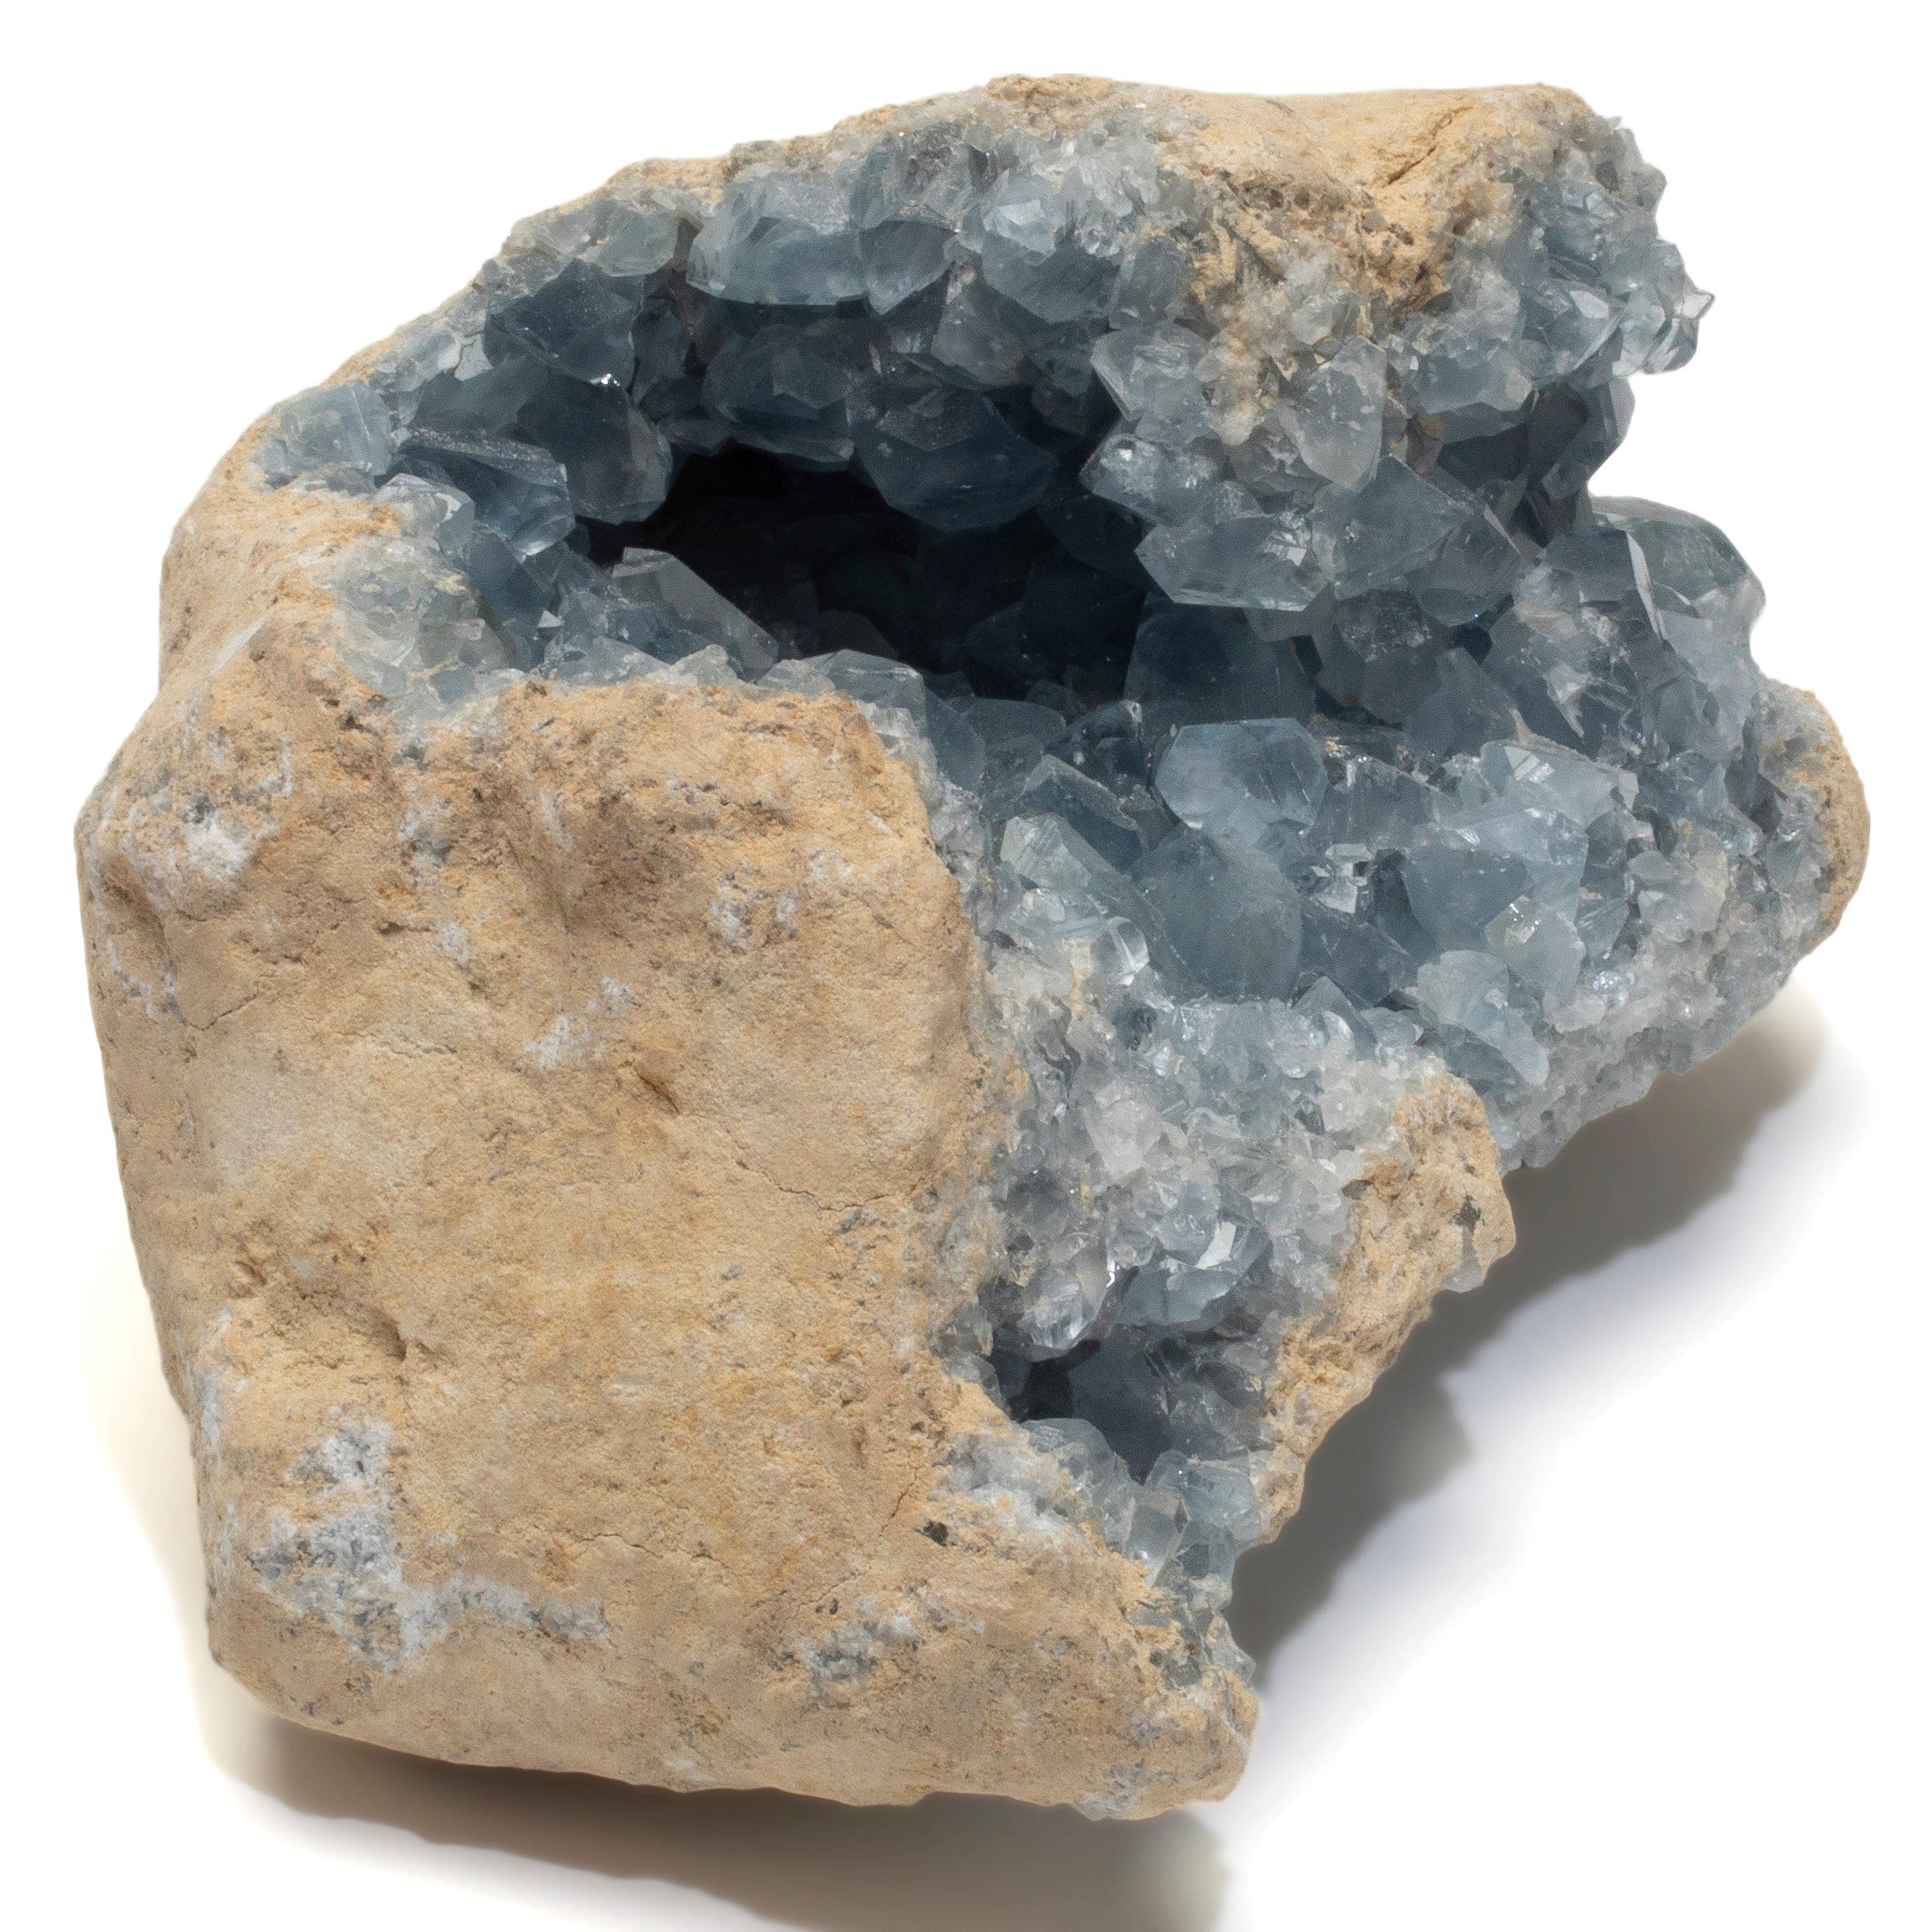 Kalifano Celestite Natural Celestite Crystal Cluster Geode from Madagascar - 10.5 in. CG2000.004